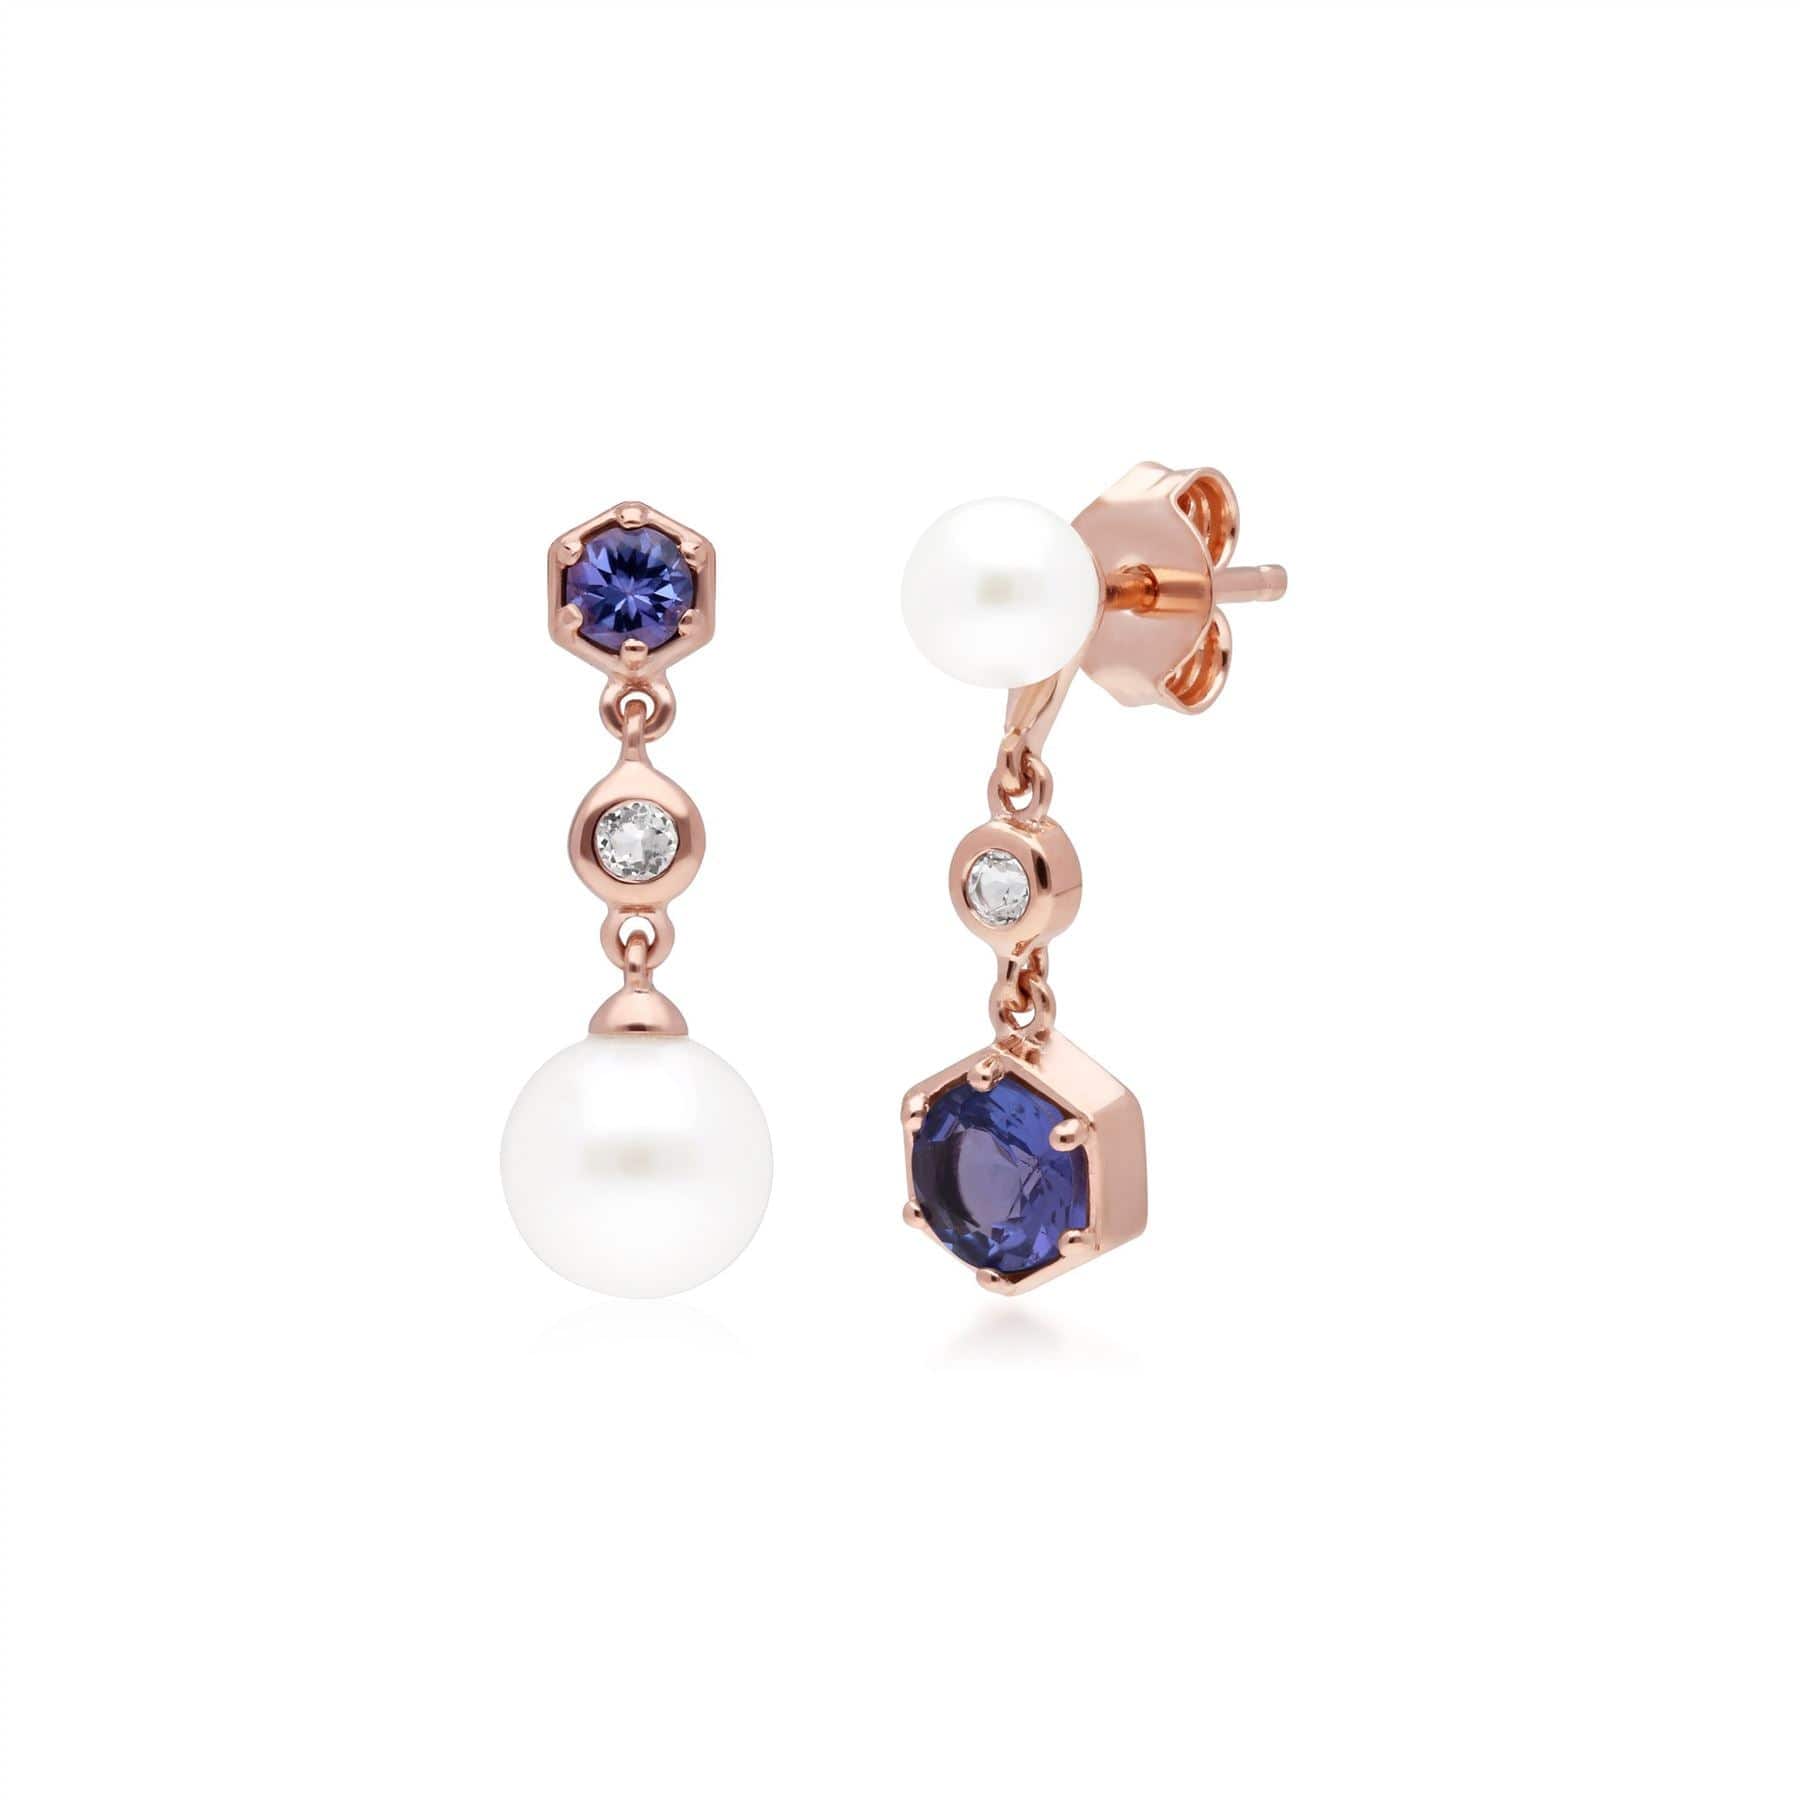 Modern Pearl, Tanzanite & Topaz Mismatched Drop Earrings in Rose Gold Plated Silver